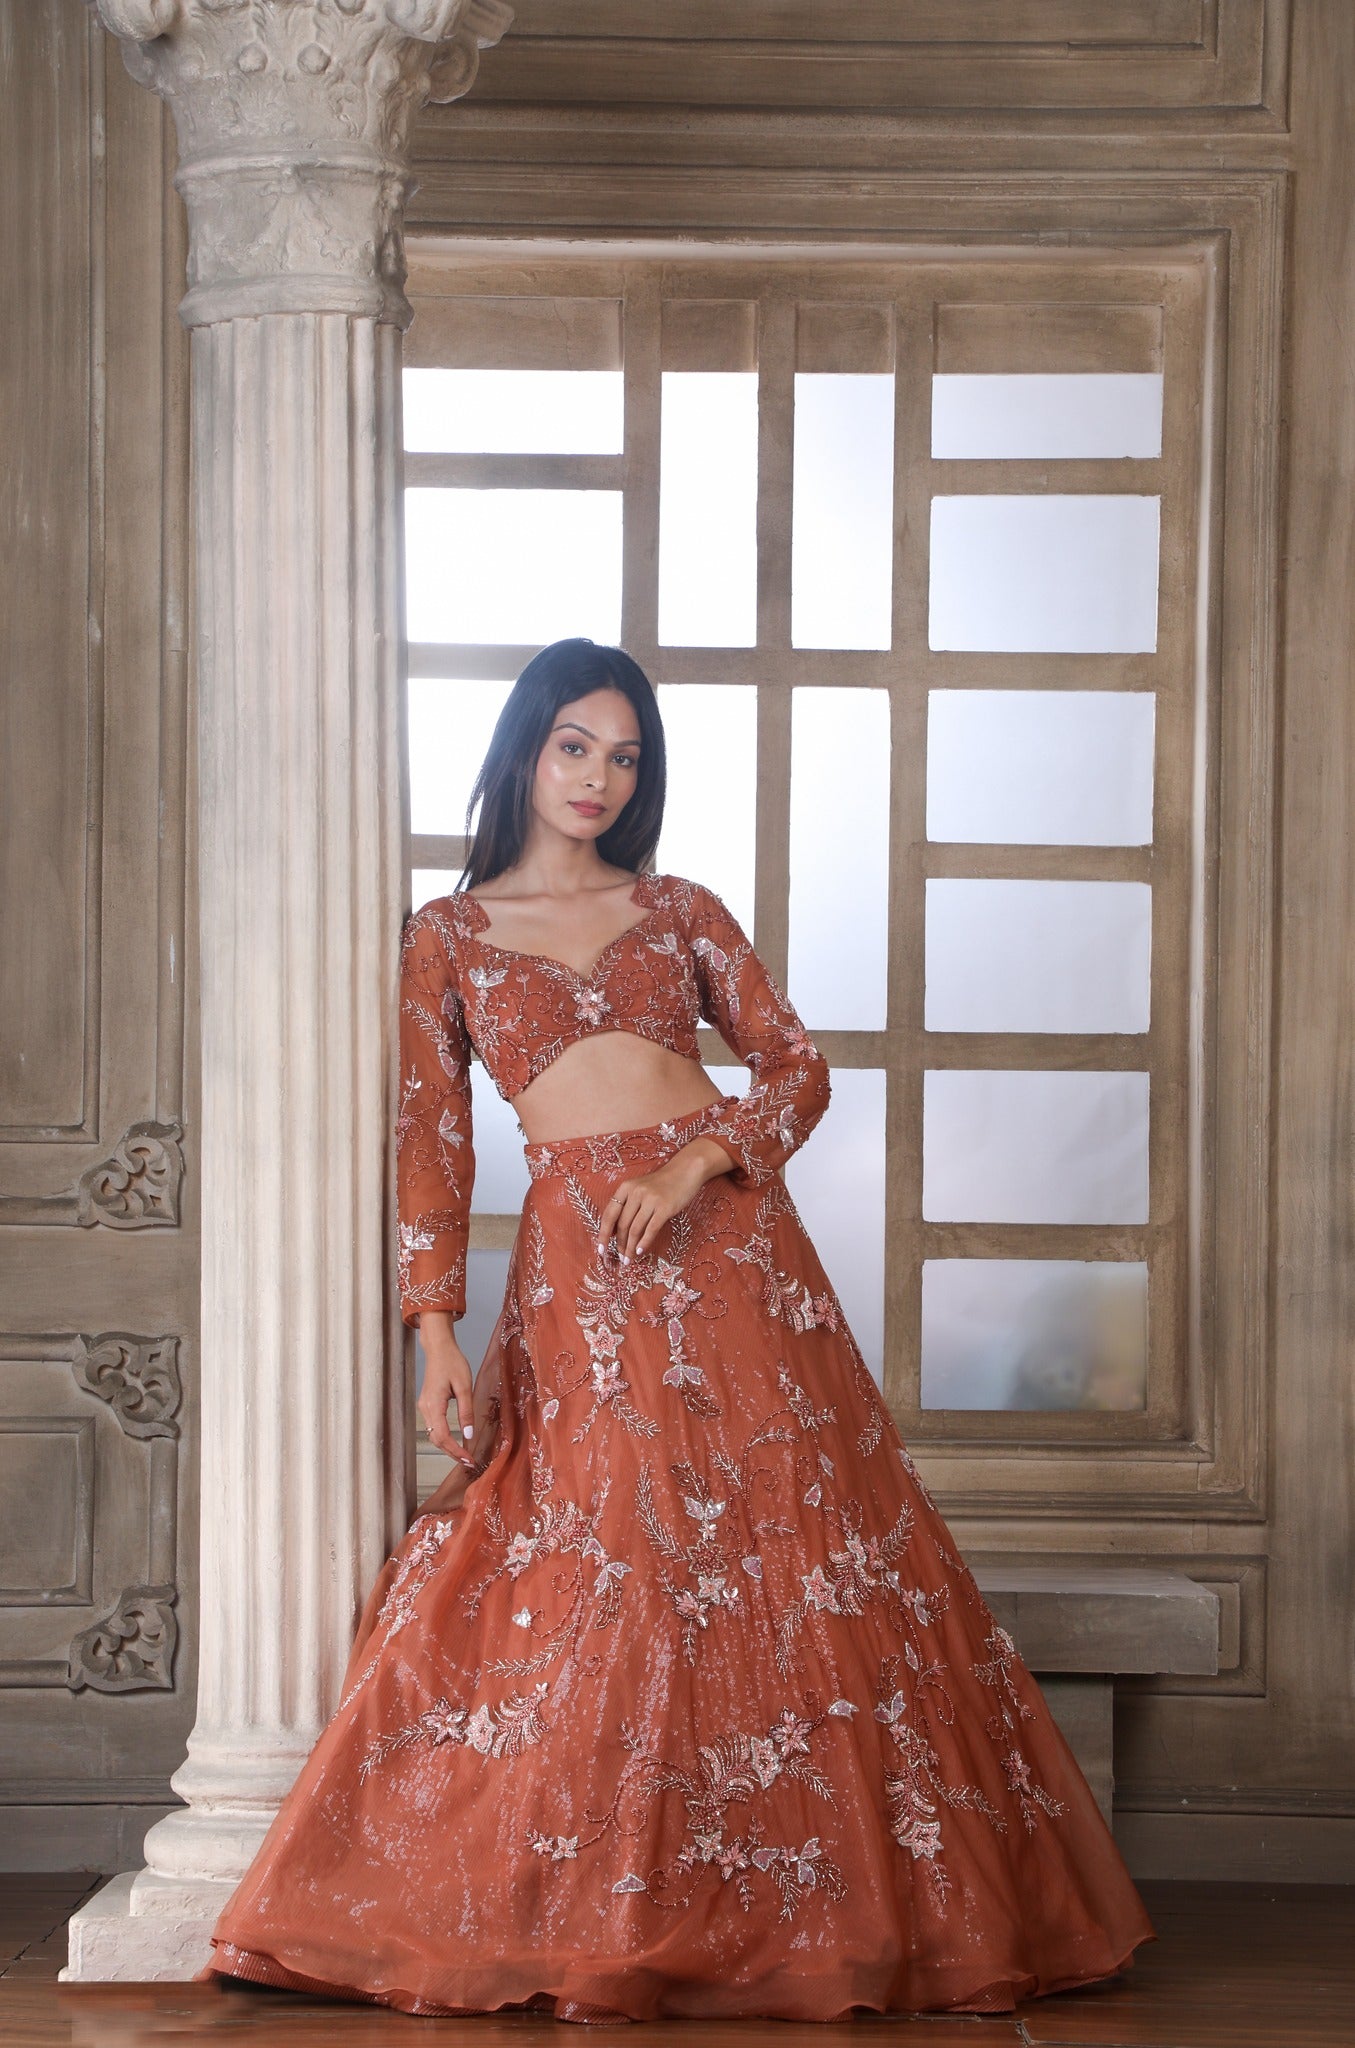 Rust Handwork Lehenga And Full Sleeves Blouse With Handcrafted Dupatta